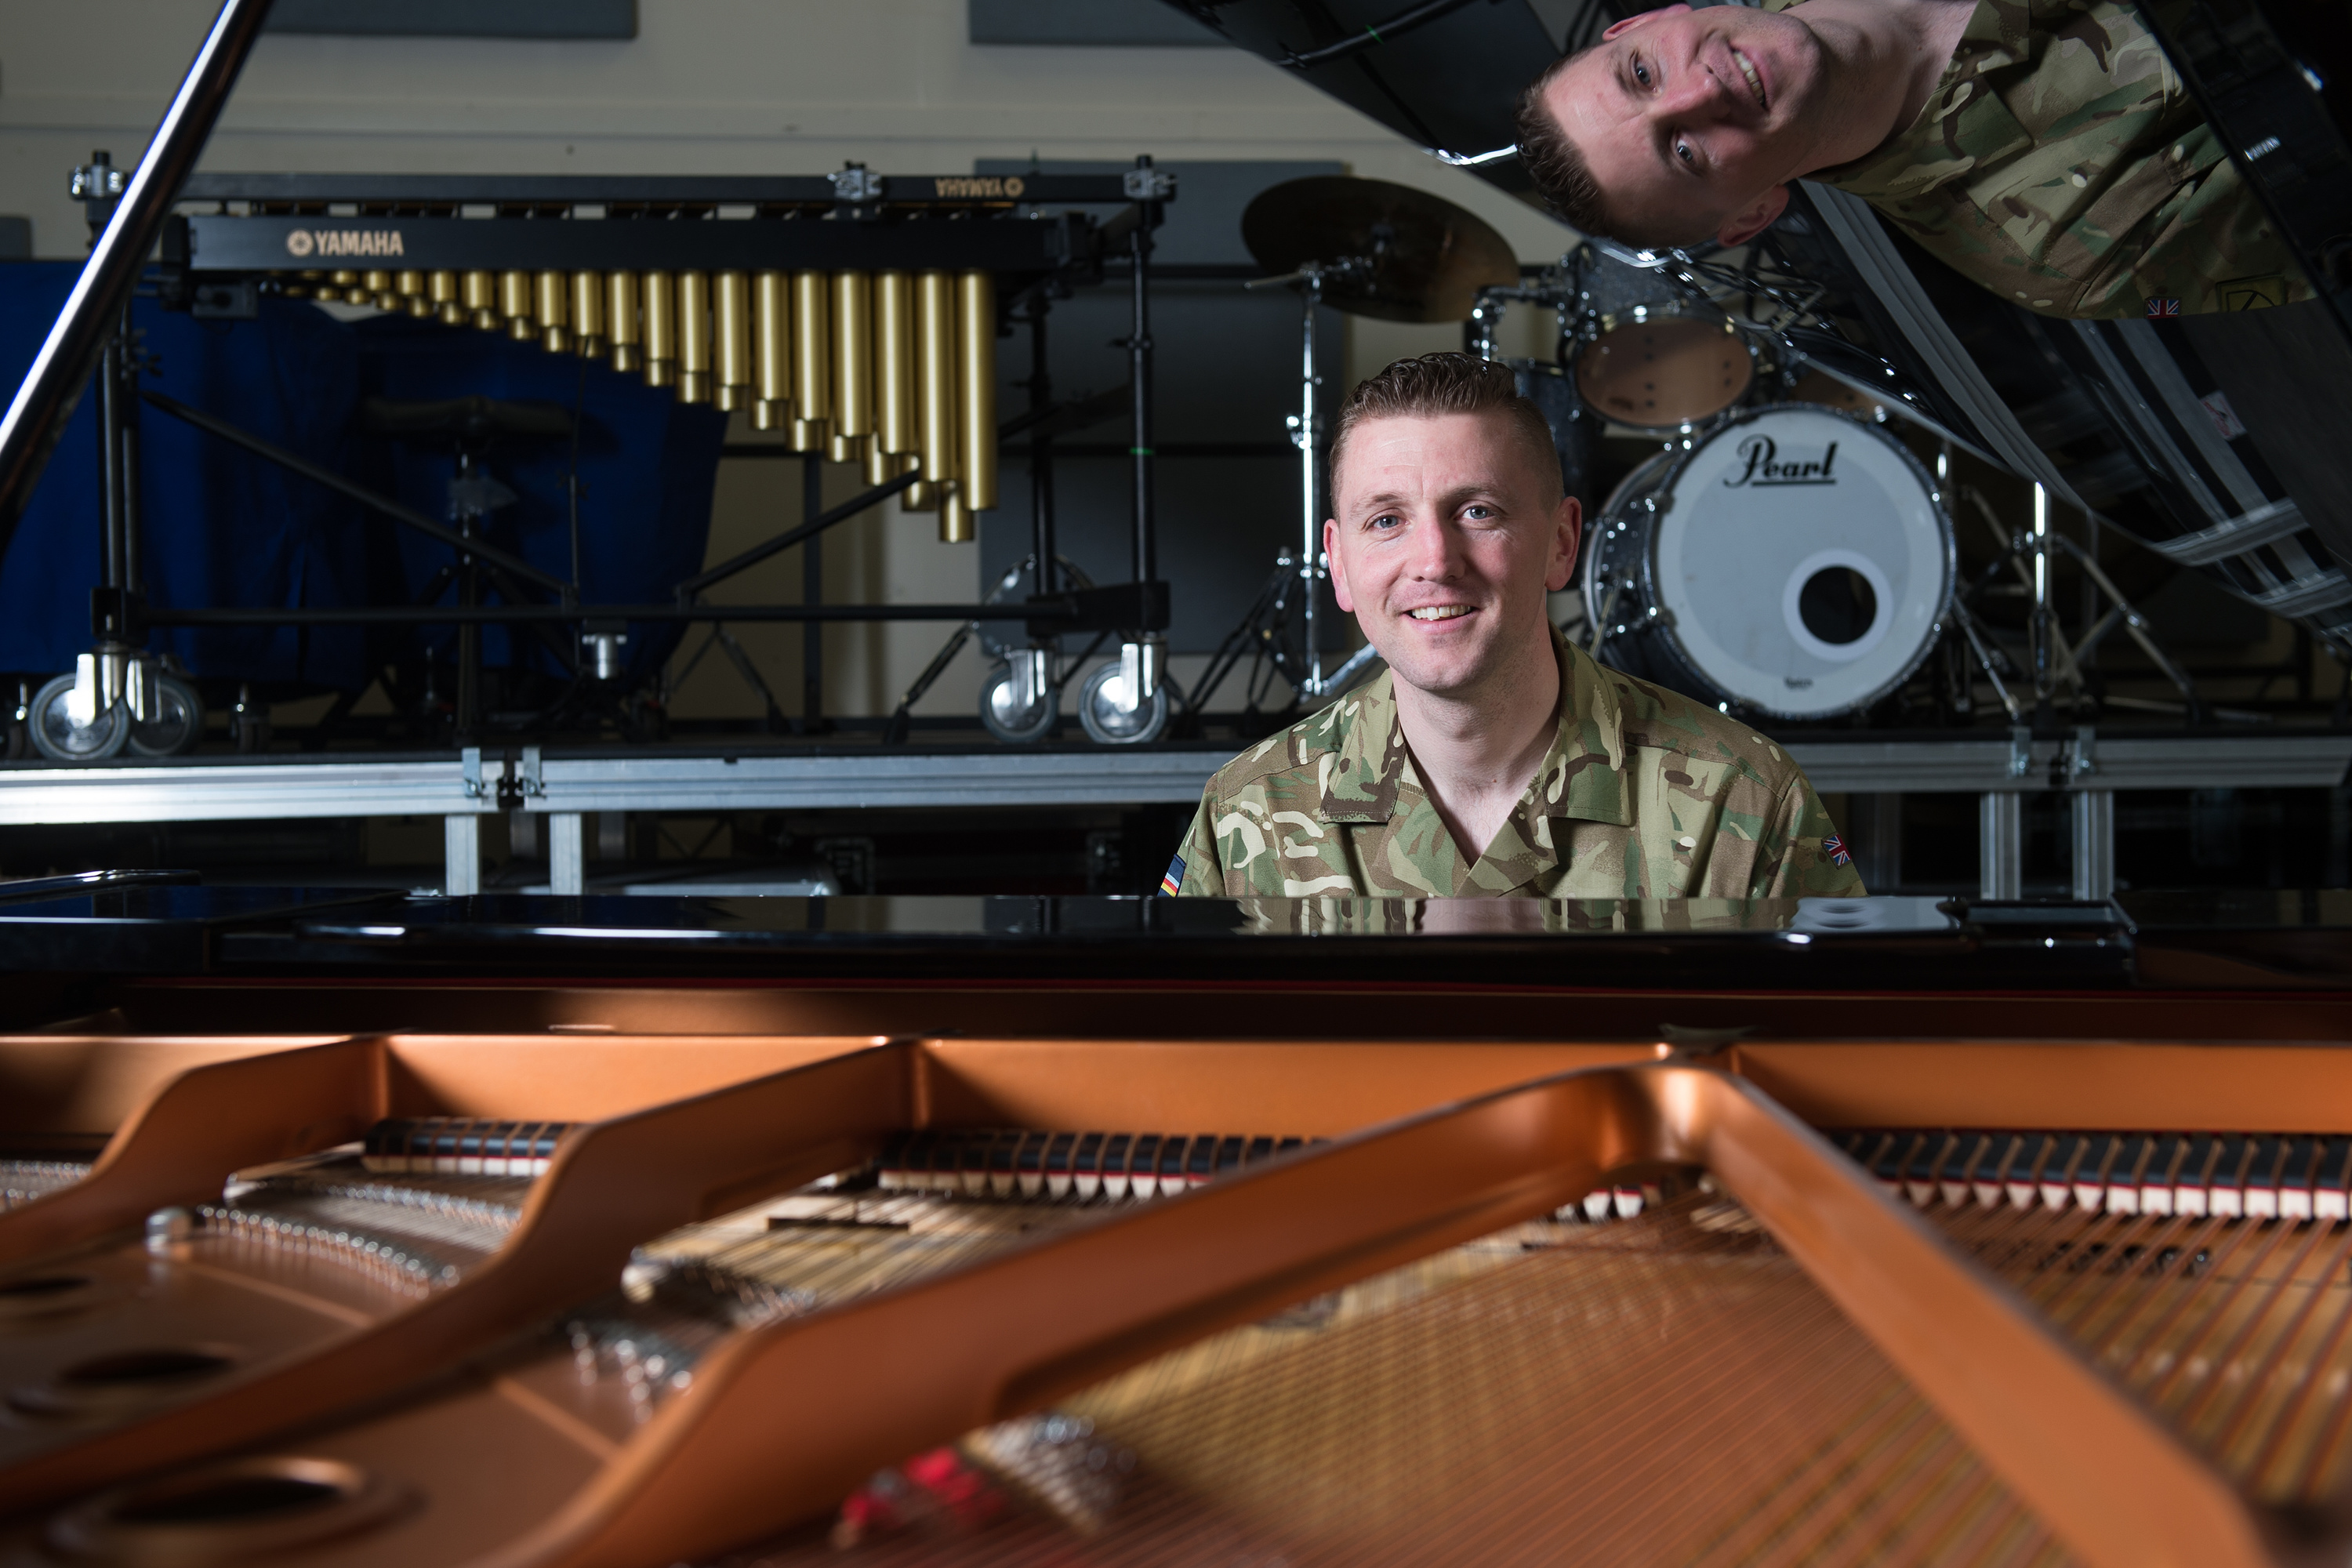 Photo credit: Corporal Max Bryan RLC. Pictured: The BBC's The Voice Contestant, British Army Soldier Staff Sergeant (Drum Major), David Barnes poses for a photograph next to a grand piano at Kneller House, London on Friday 19th February 2016. NOTE TO DESKS: All images remain Crown Copyright. Photo credit to read - Corporal Max Bryan RLC